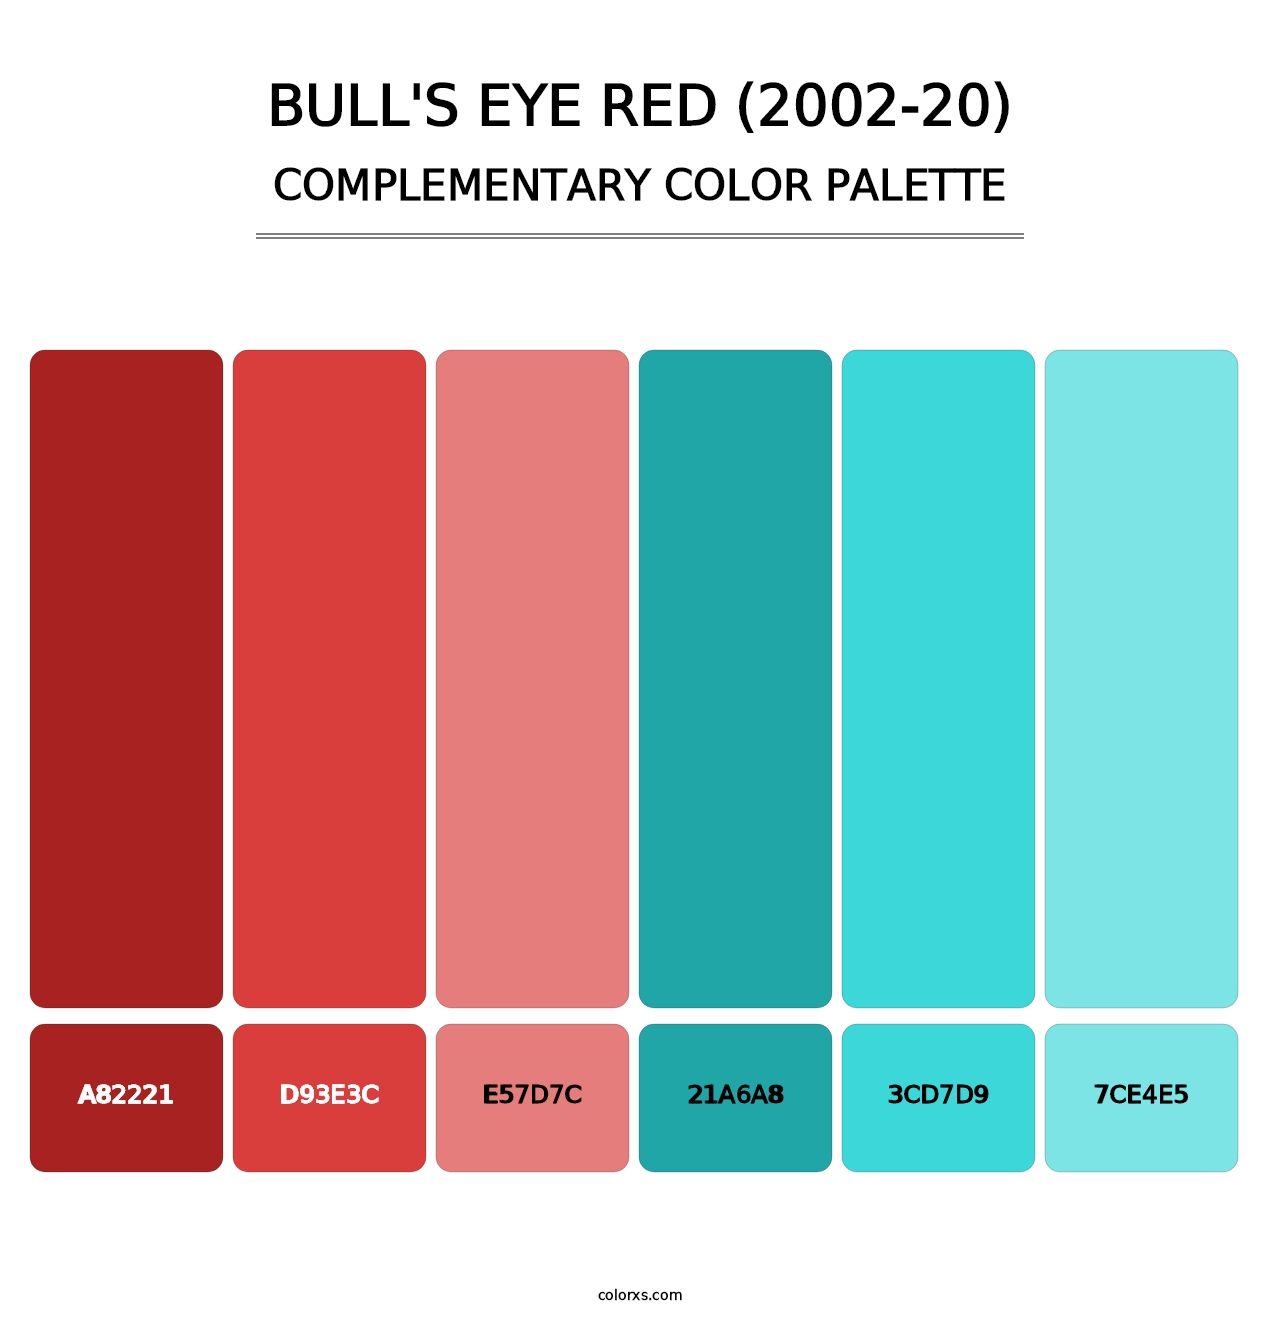 Bull's Eye Red (2002-20) - Complementary Color Palette